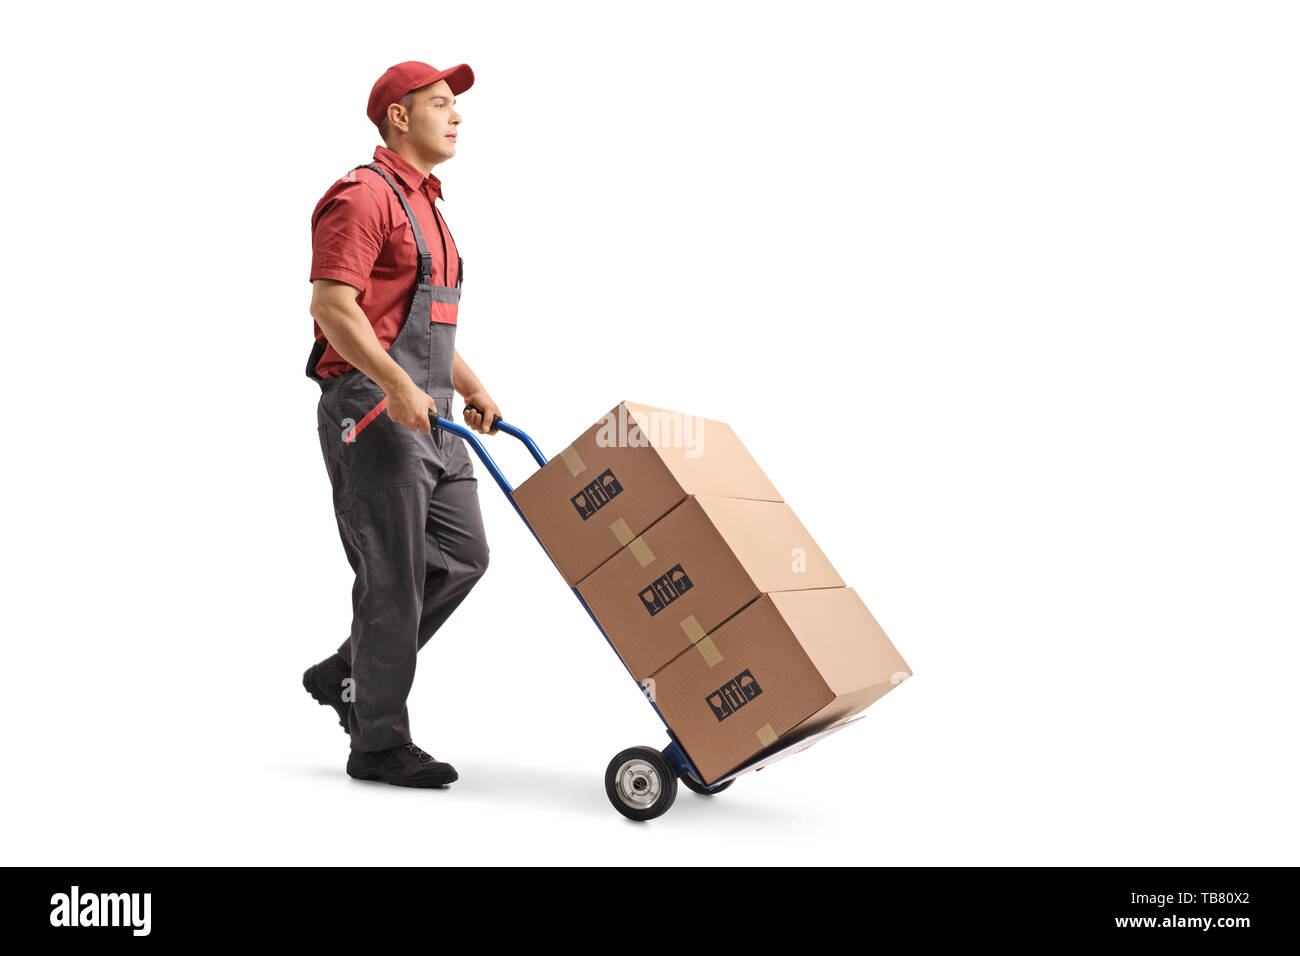 Full length shot of a young male worker in a uniform pushing boxes on a hand truck isolated on white background Stock Photo